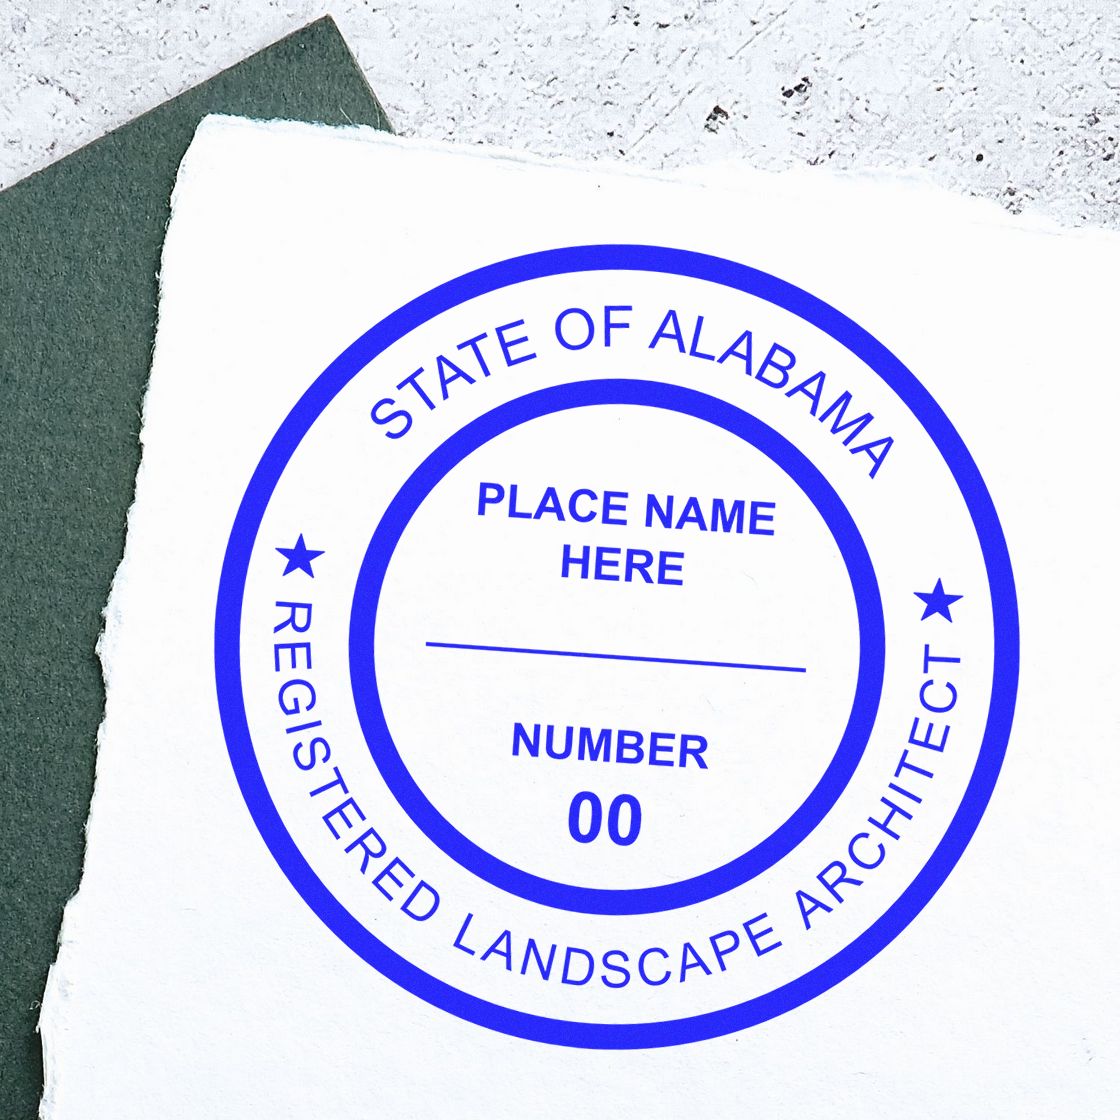 Alabama Landscape Architectural Seal Stamp in use photo showing a stamped imprint of the Alabama Landscape Architectural Seal Stamp